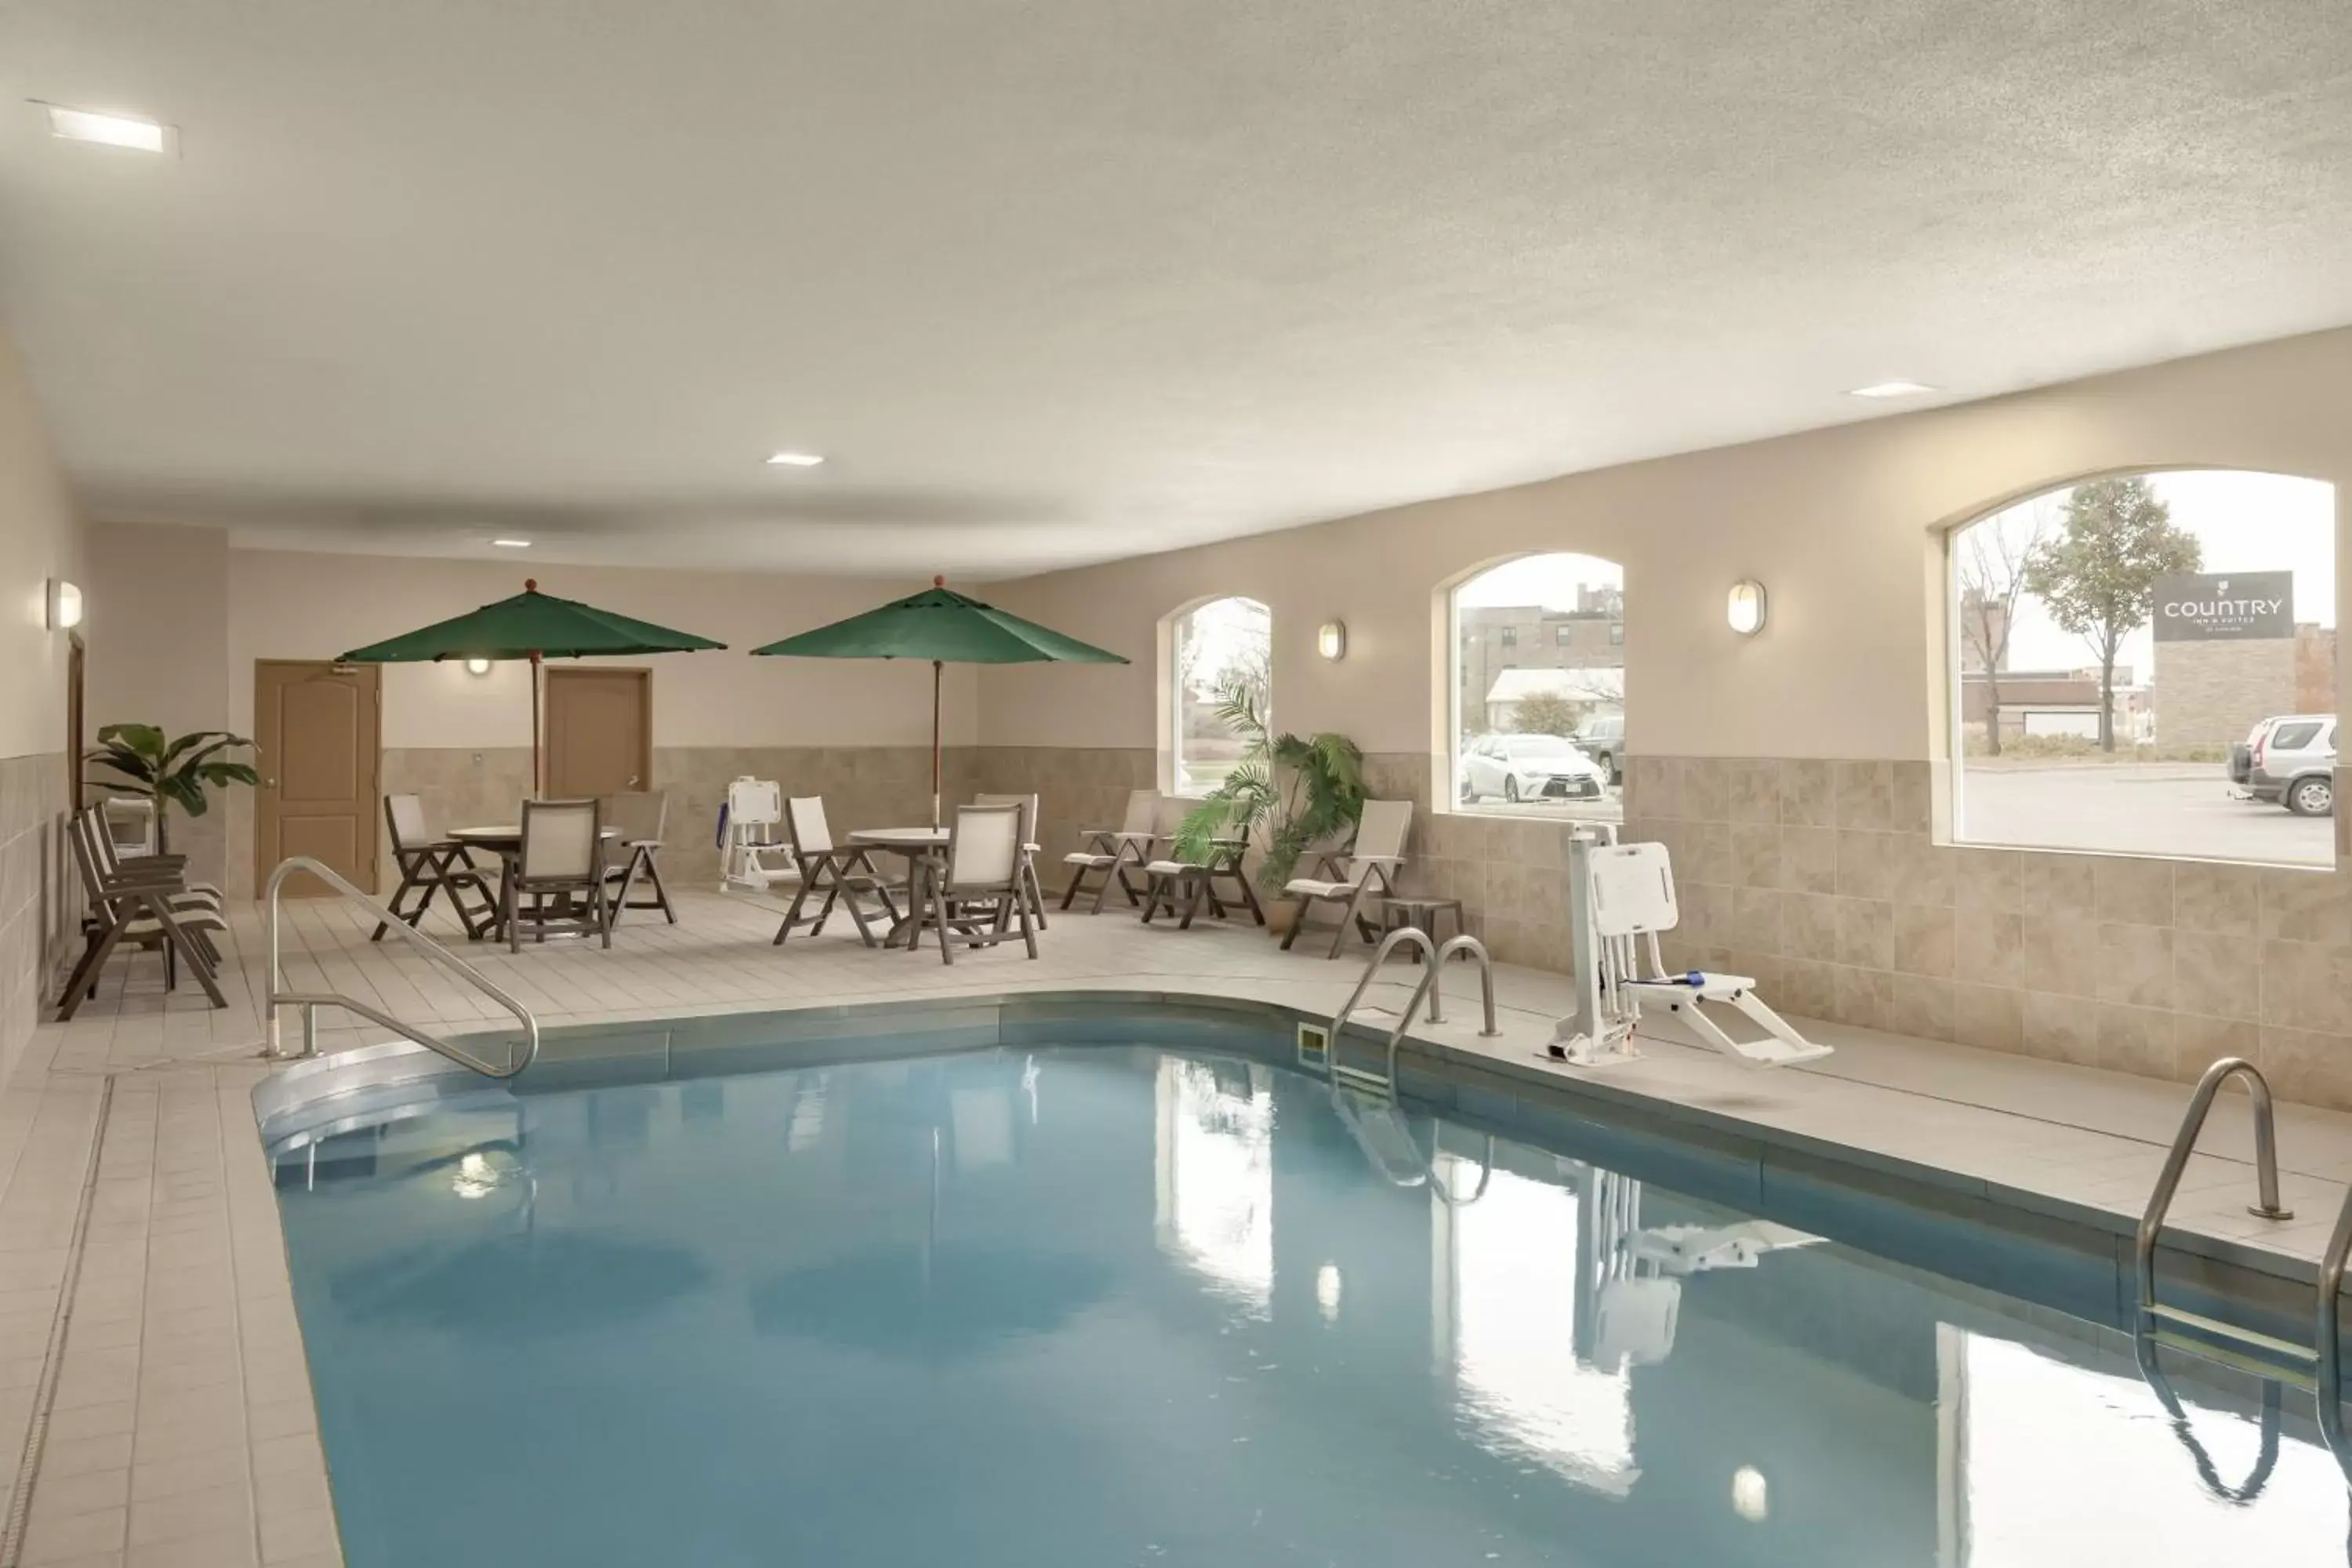 Swimming Pool in Country Inn & Suites by Radisson, Sioux Falls, SD